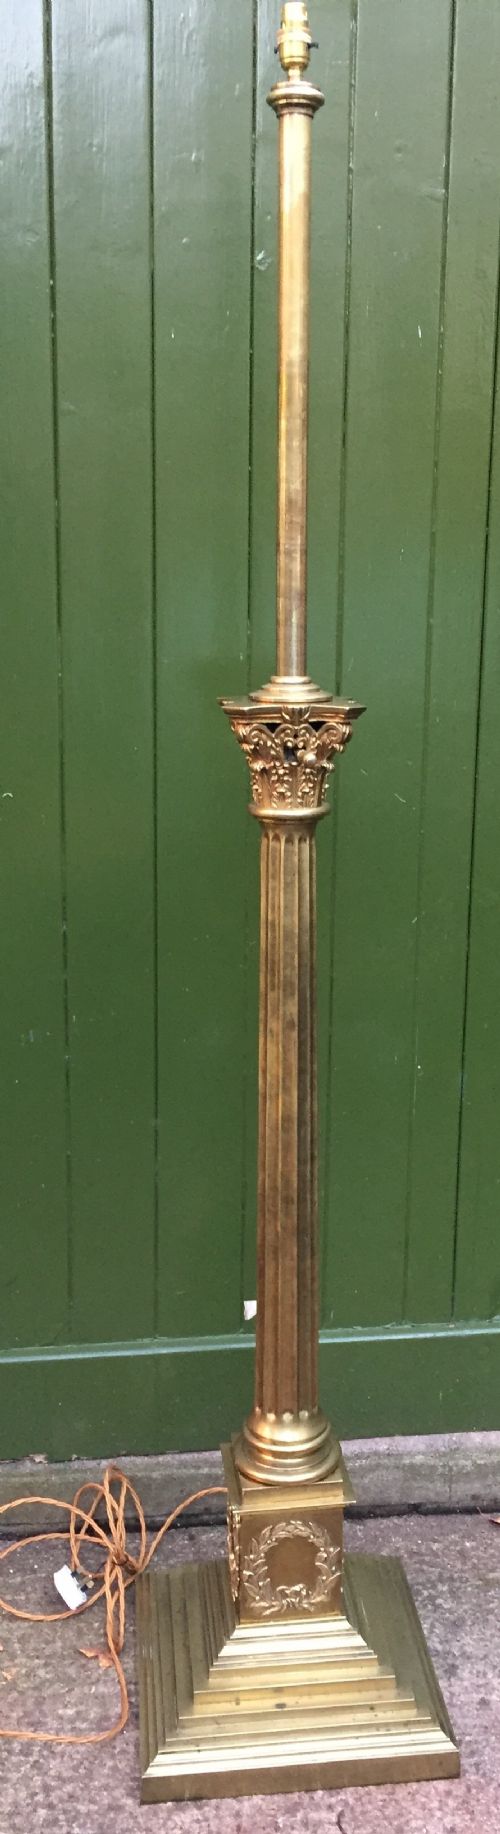 imposing late c19th early c20th edwardian period brass corinthian capped fluted column standard lamp